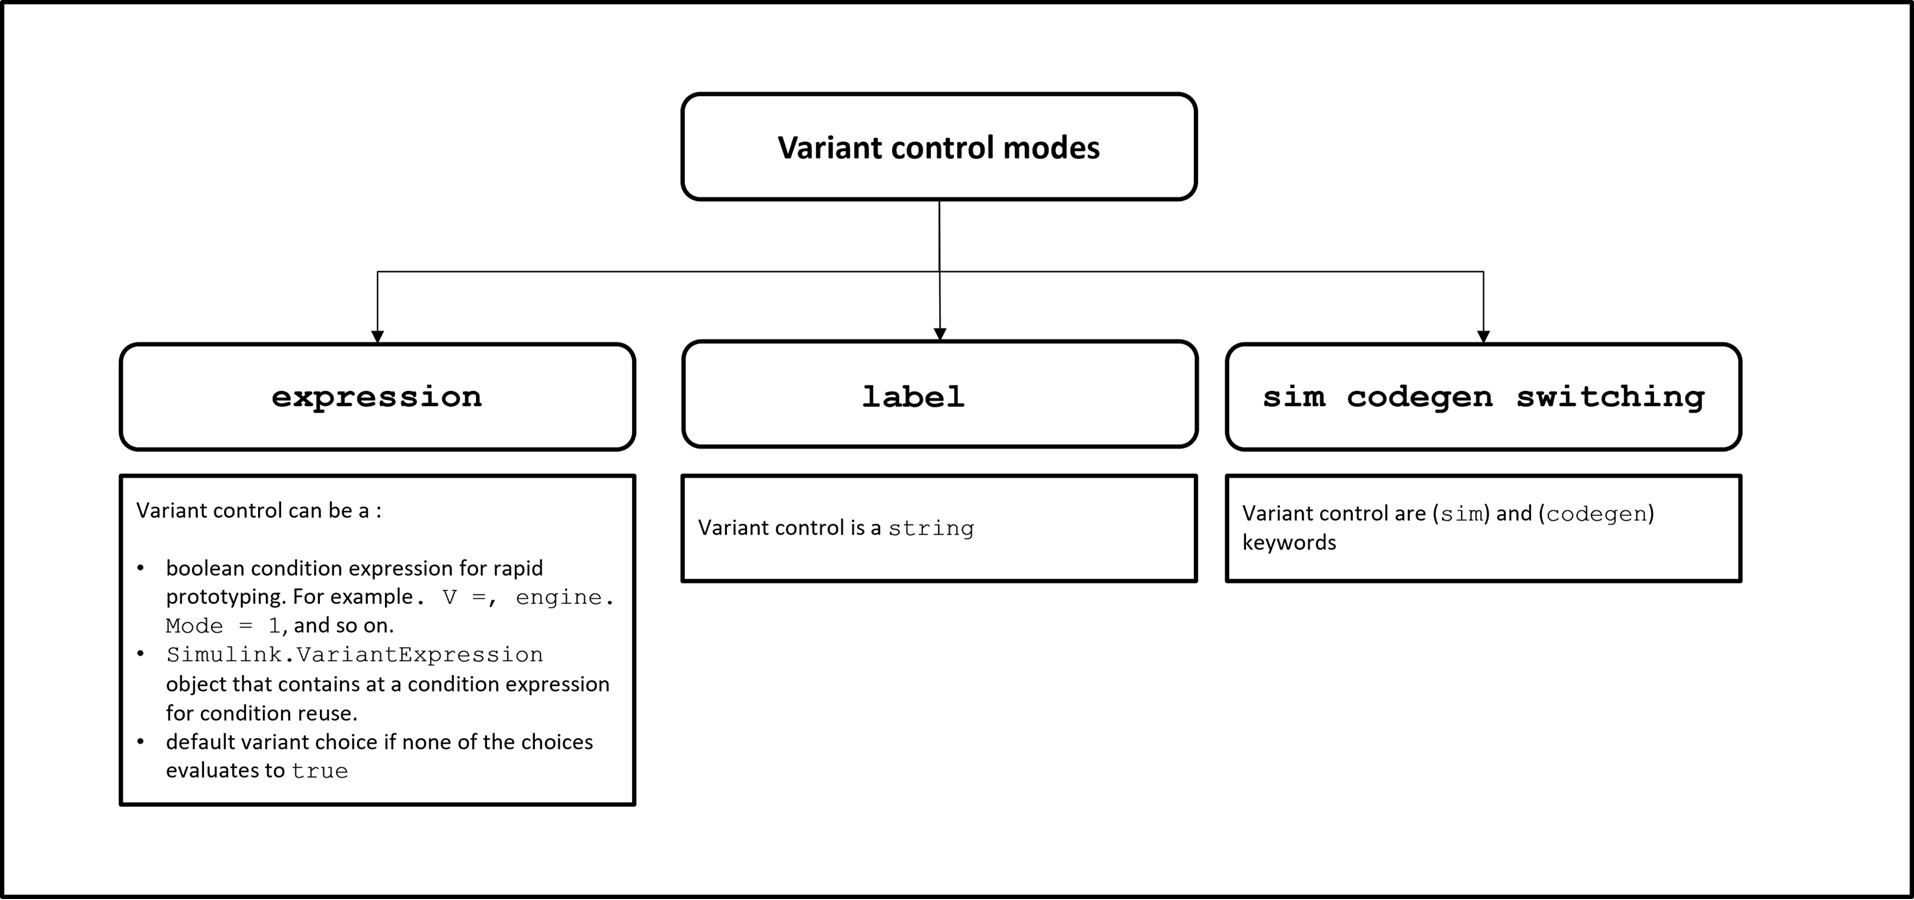 Types of variant control modes with examples. In expression mode, variant control can be a boolean condition expression, a Simulink.VariantExpression object, or a default variant choice. In label mode, variant control is a string, and in sim codegen switching mode, variant controls are (sim) and (codegen) keywords.